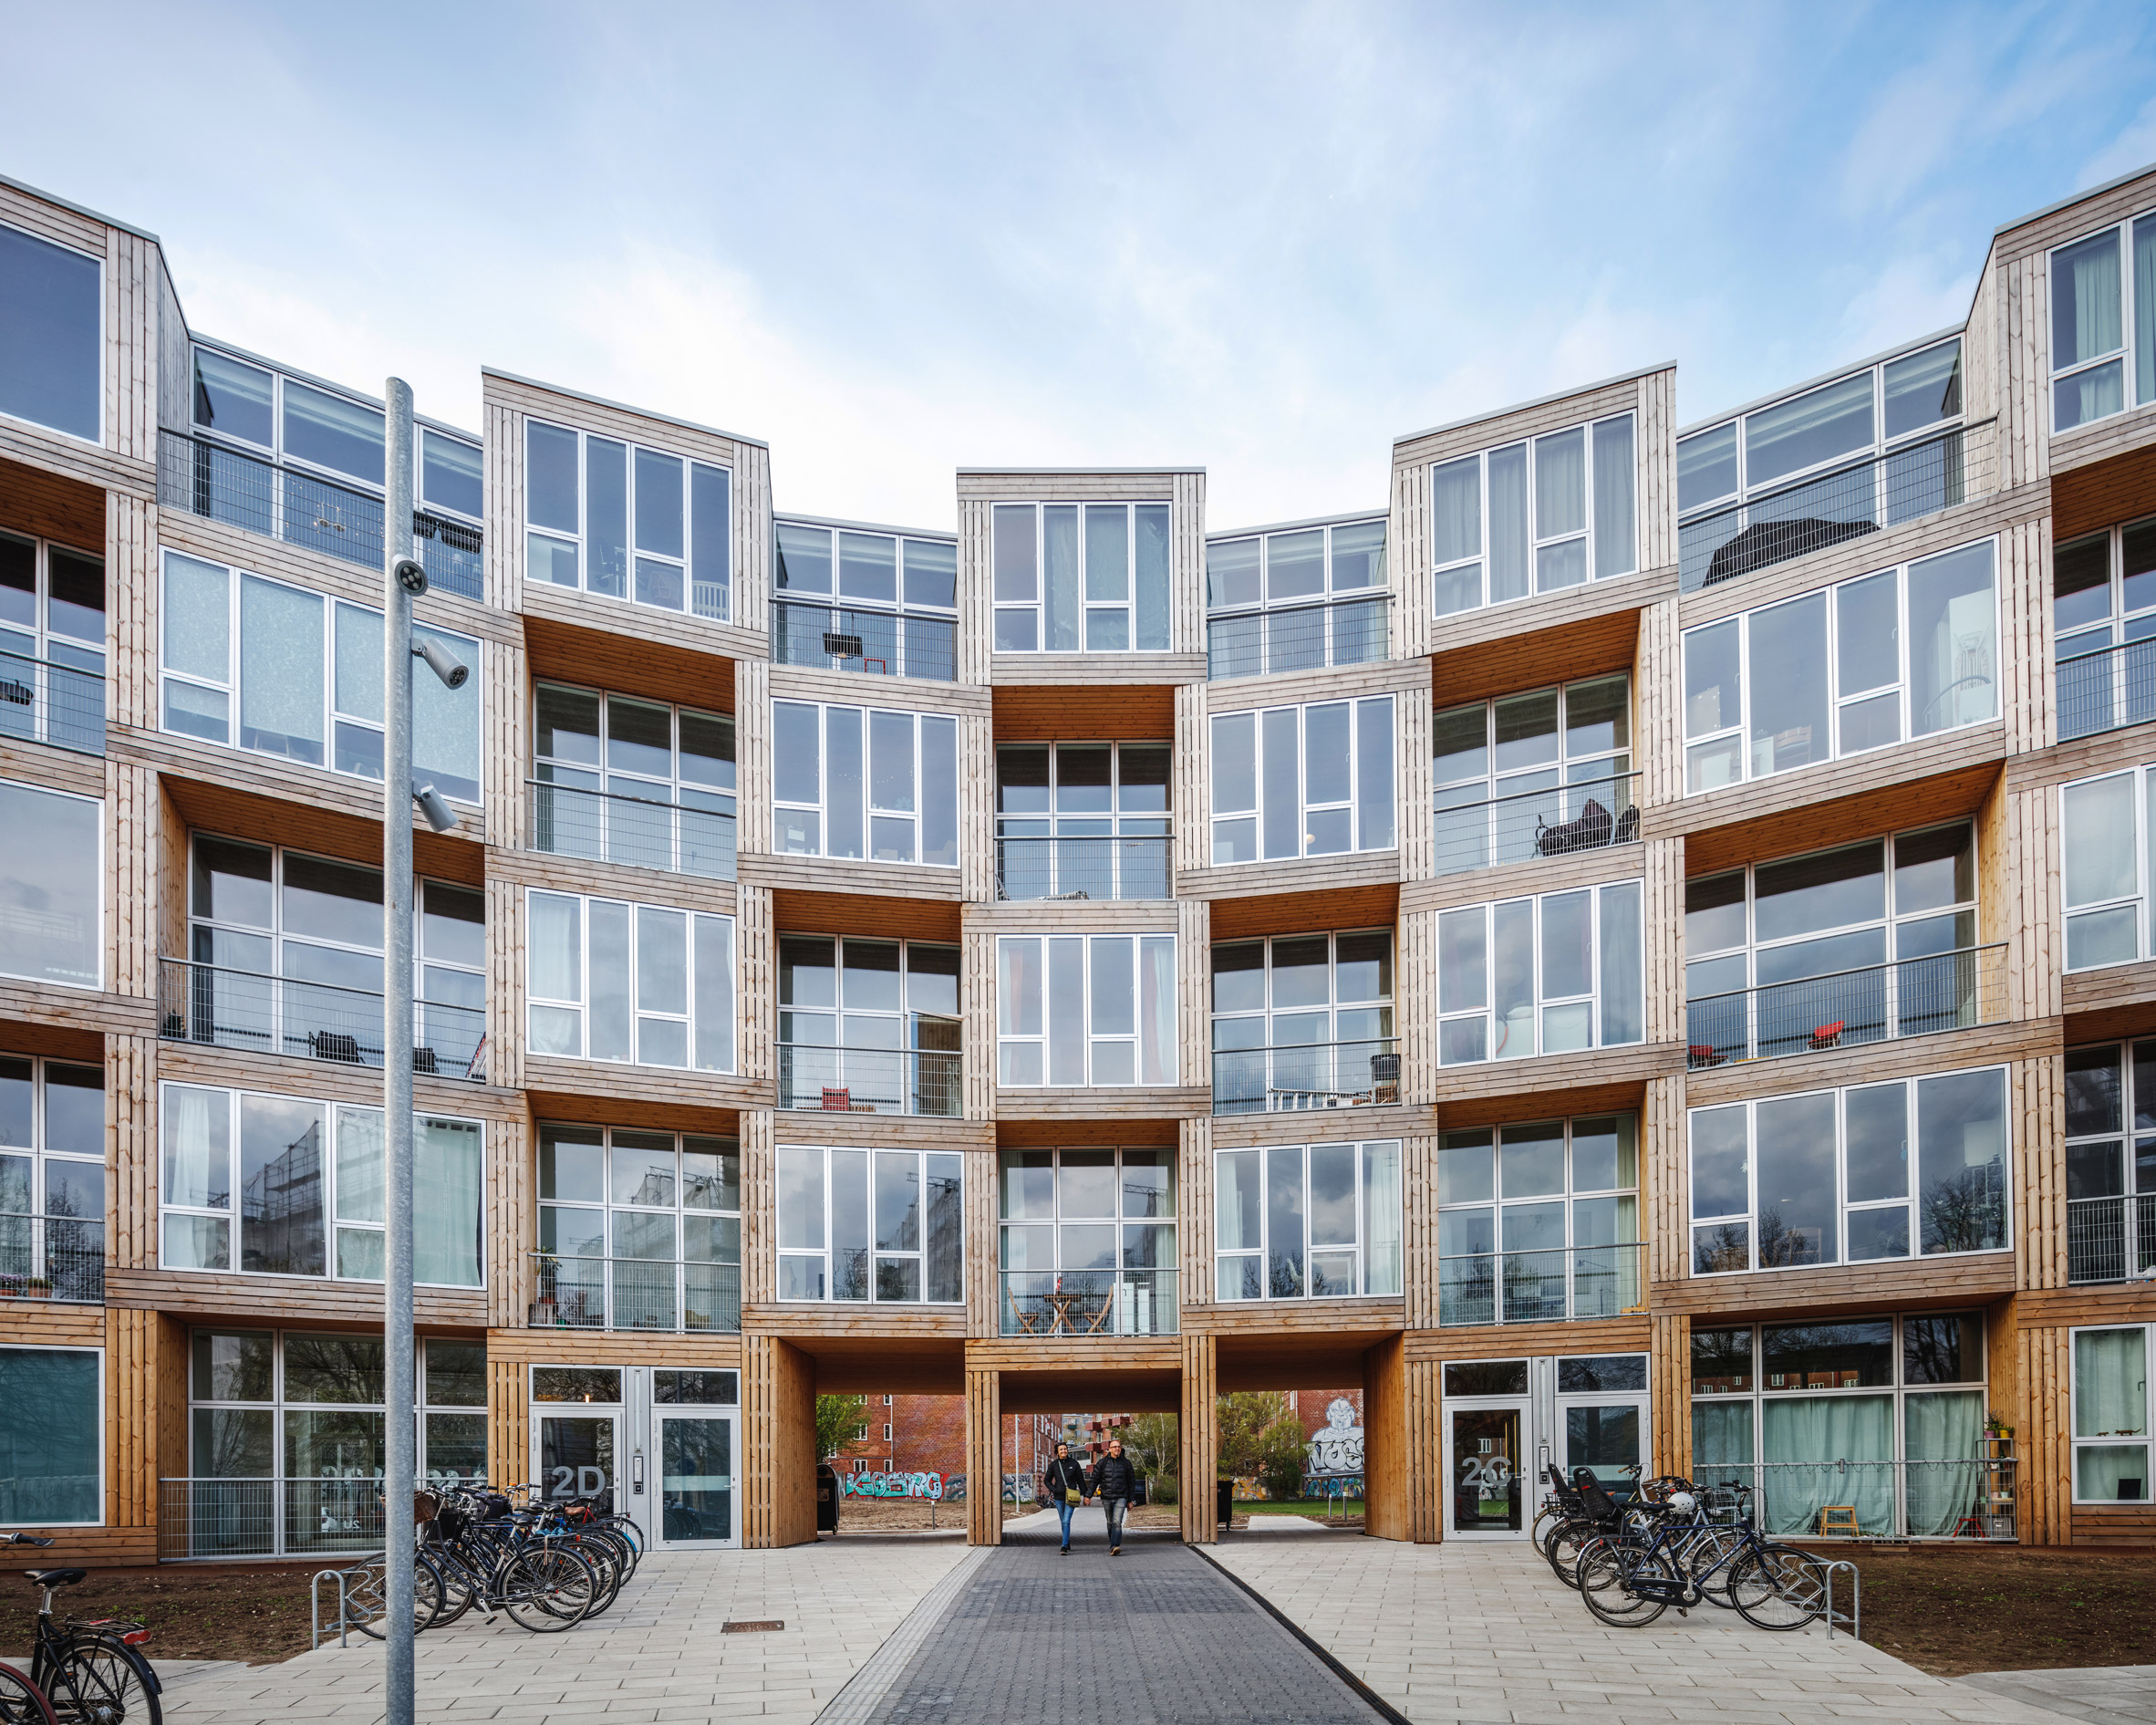 BIG builds "winding wall" of affordable housing in Copenhagen